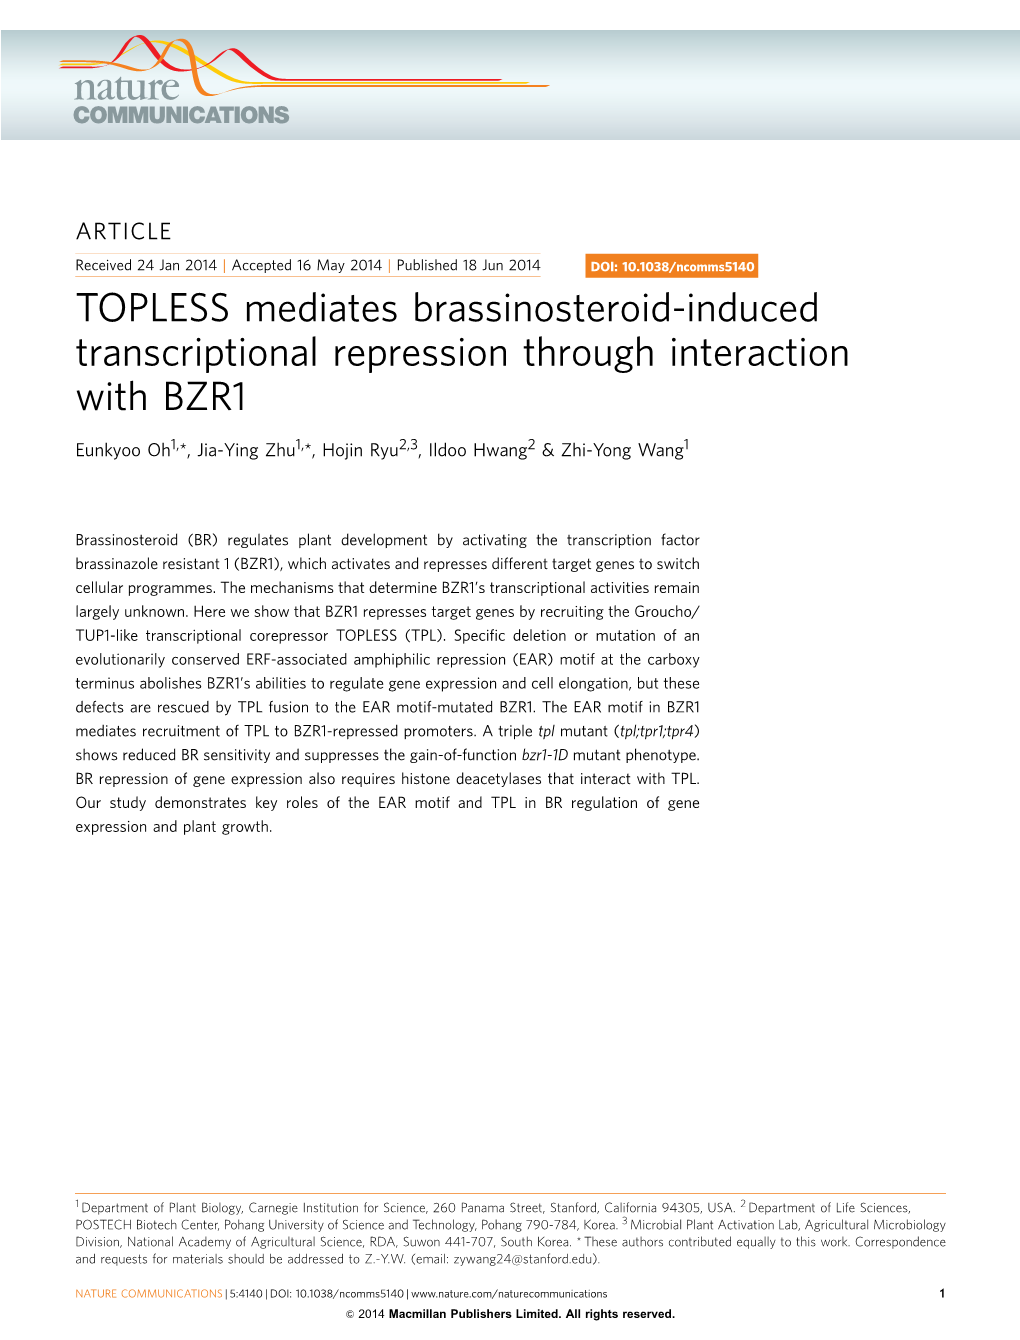 TOPLESS Mediates Brassinosteroid-Induced Transcriptional Repression Through Interaction with BZR1